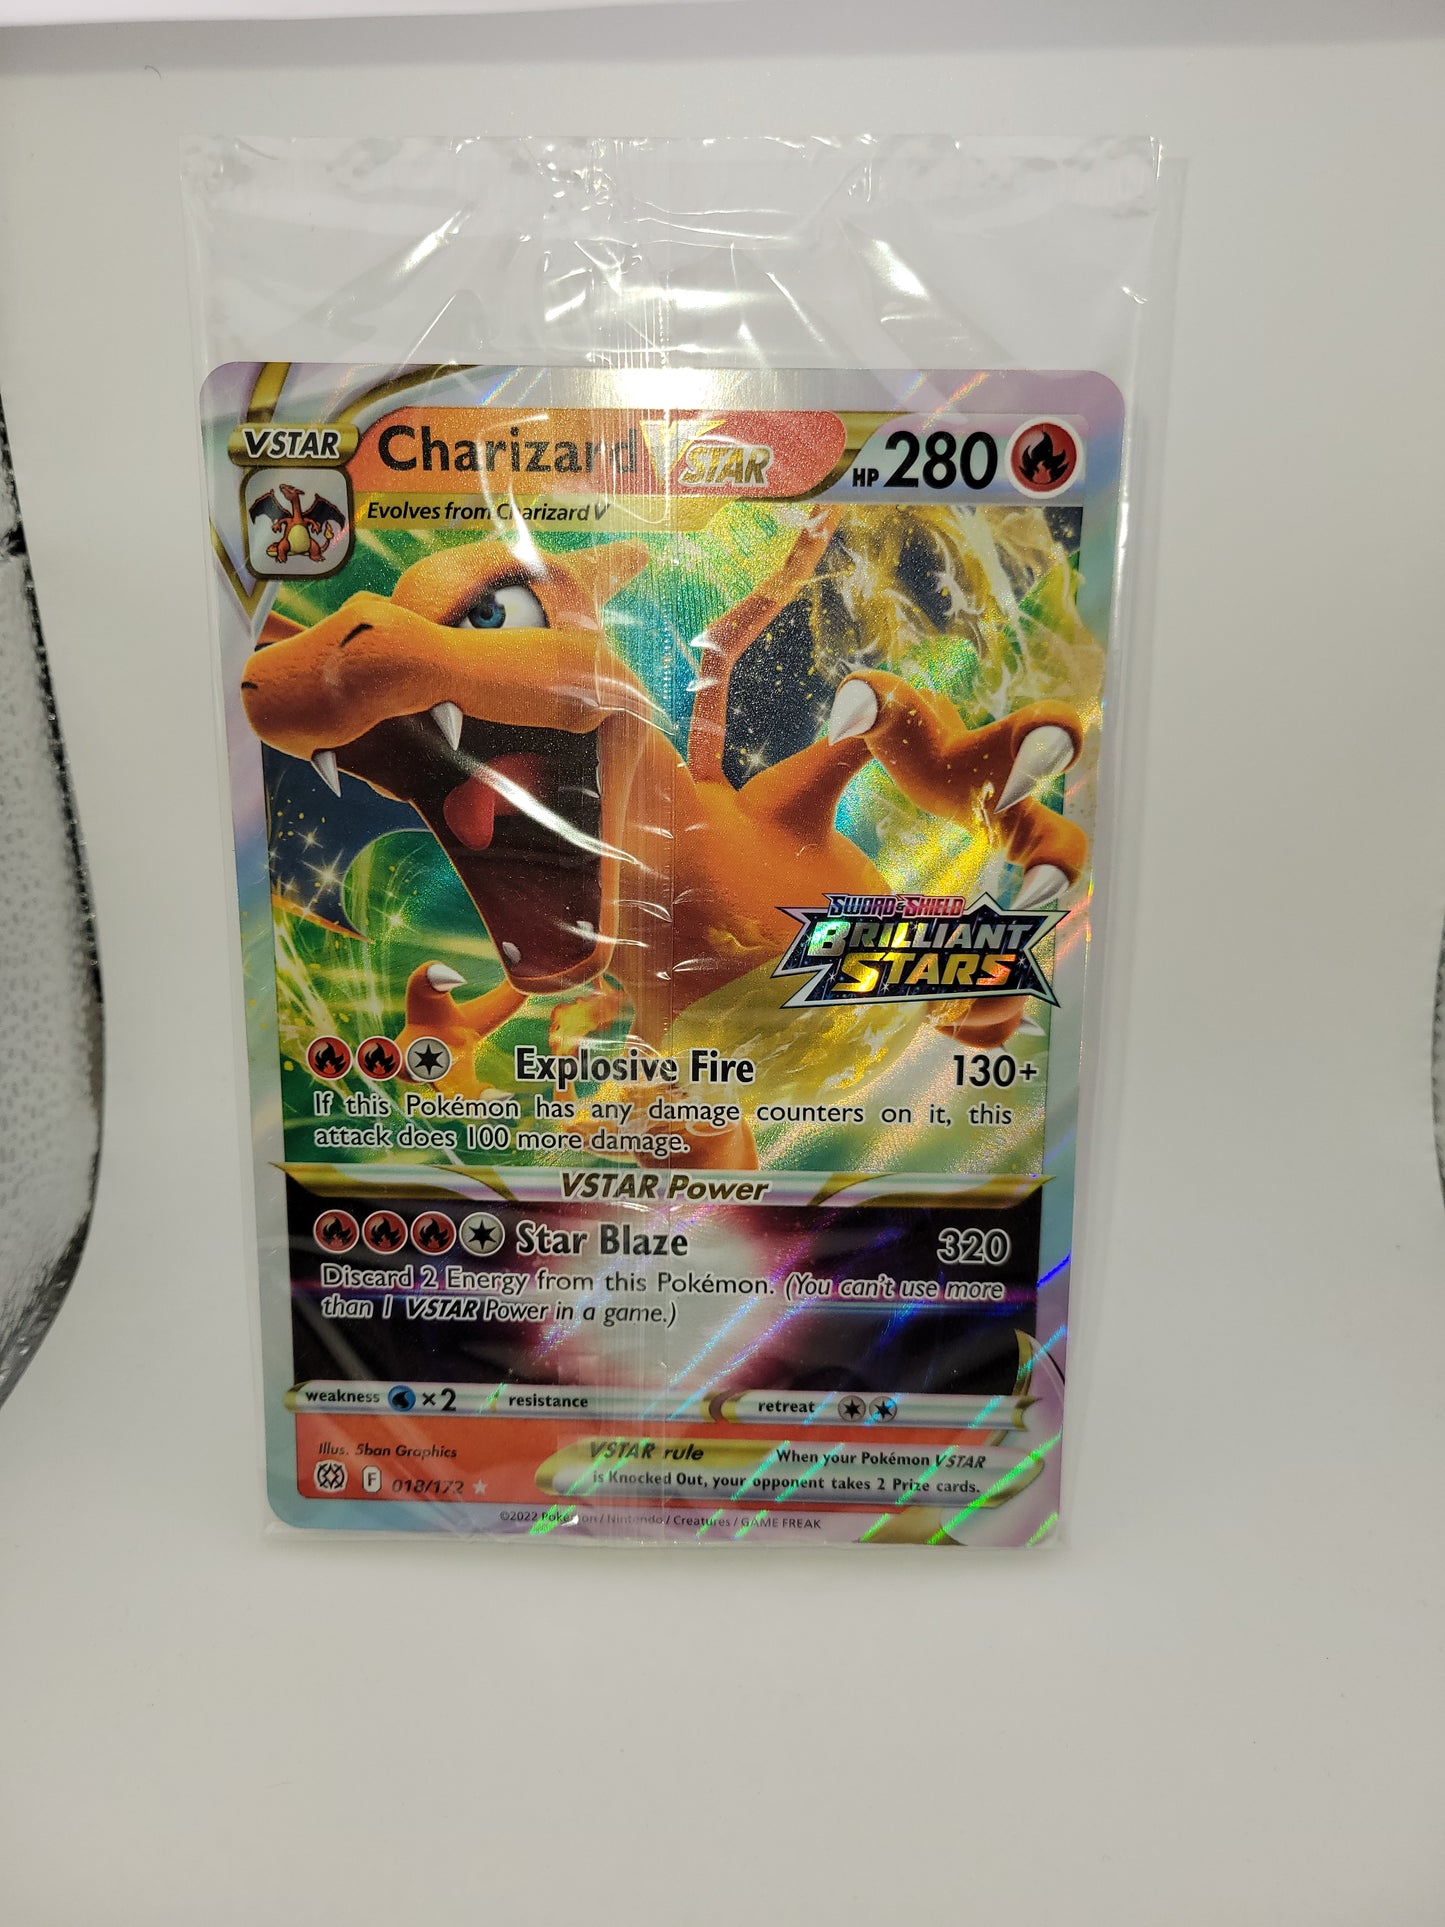 1 Sealed Charizard Oversize Card with UK exclusive Brilliant Stars stamp.